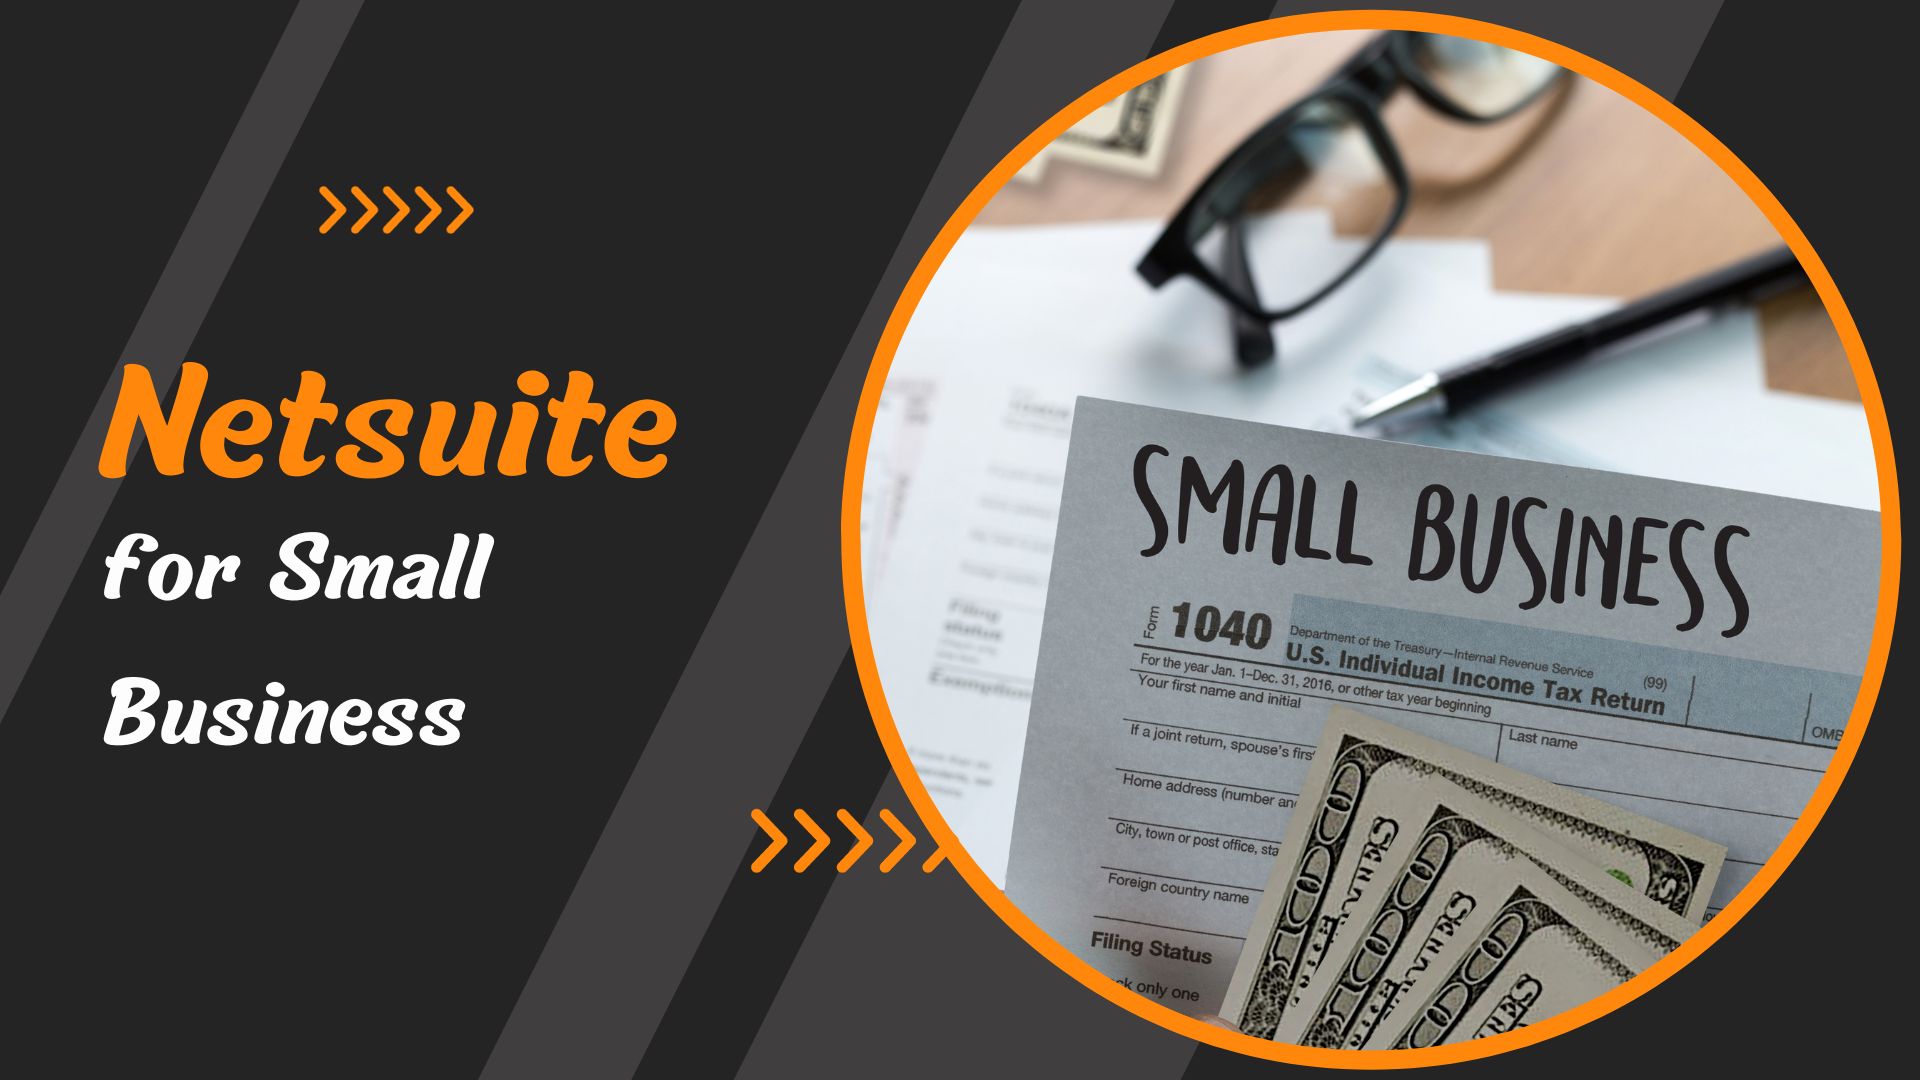 Netsuite for Small Business